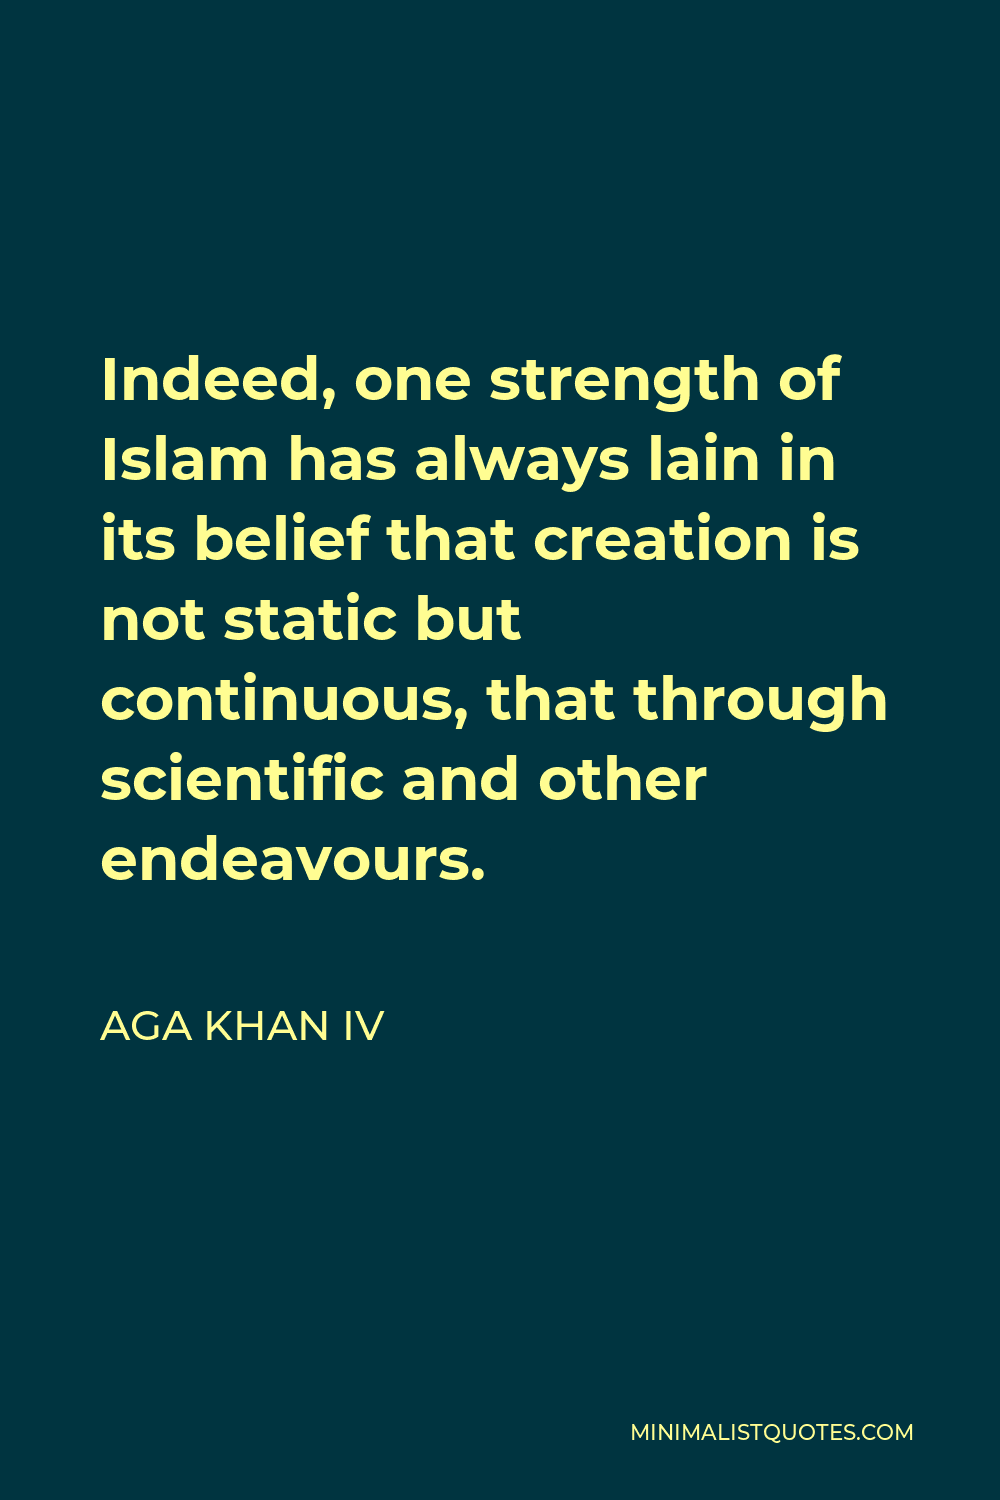 Aga Khan IV Quote - Indeed, one strength of Islam has always lain in its belief that creation is not static but continuous, that through scientific and other endeavours.